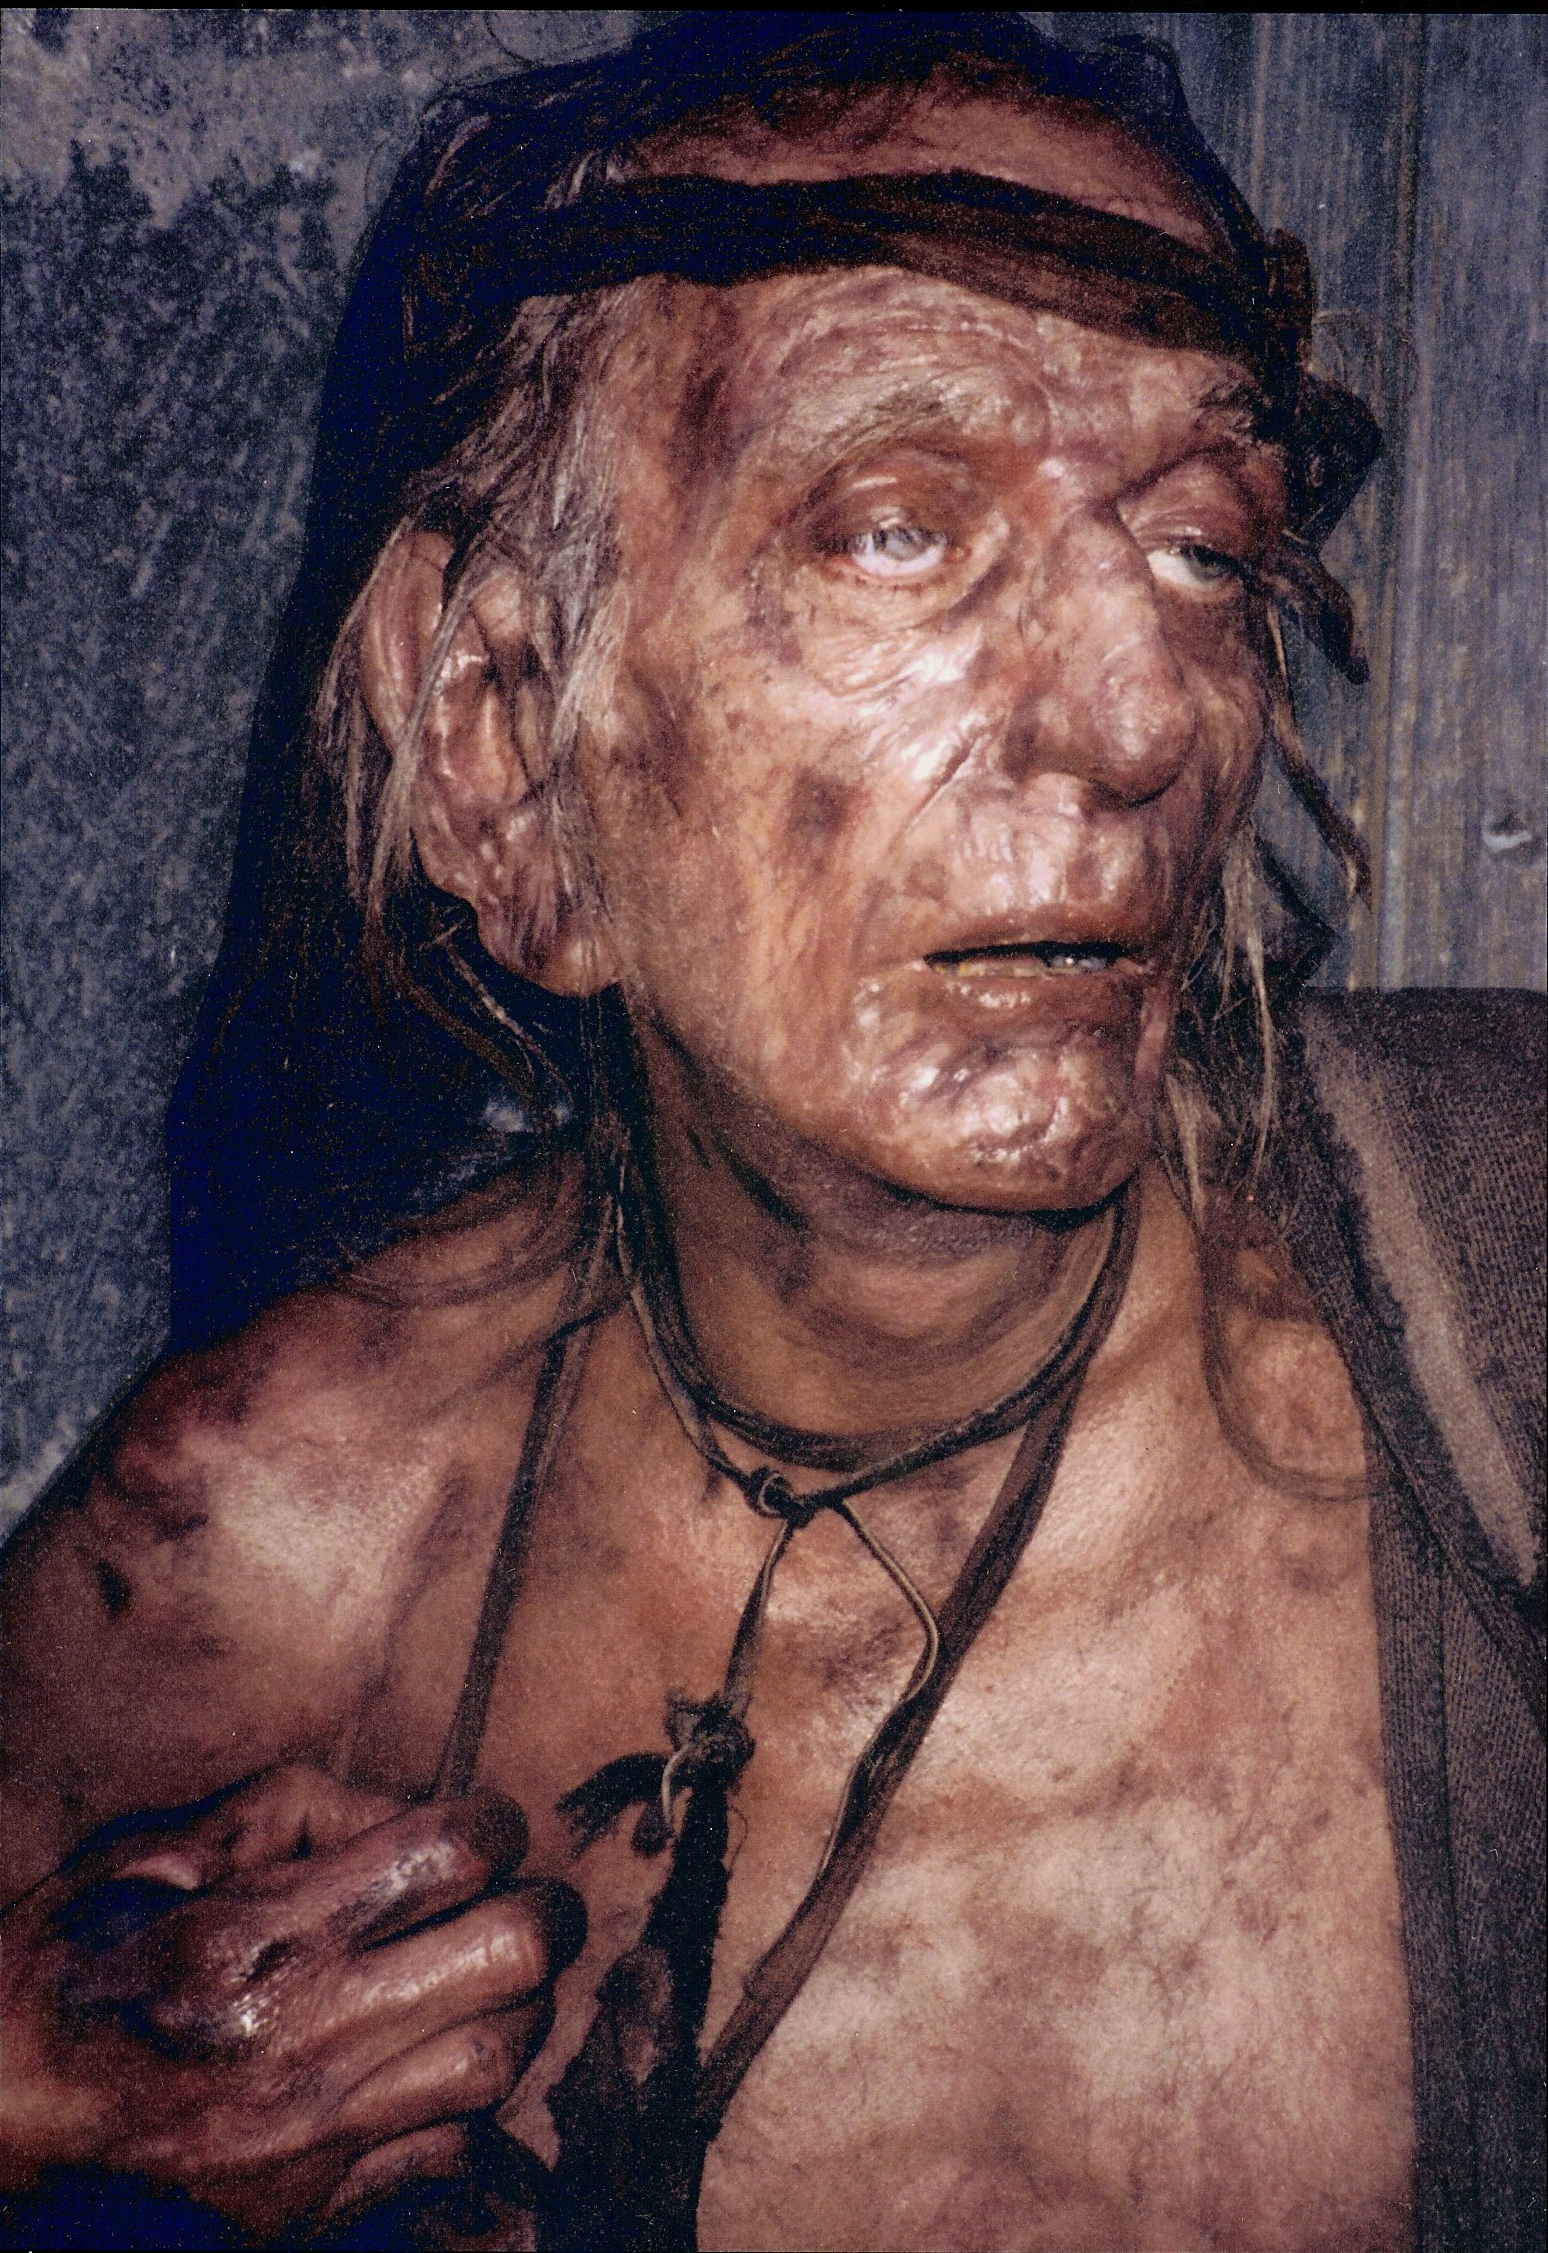 Leprosy makeup in 